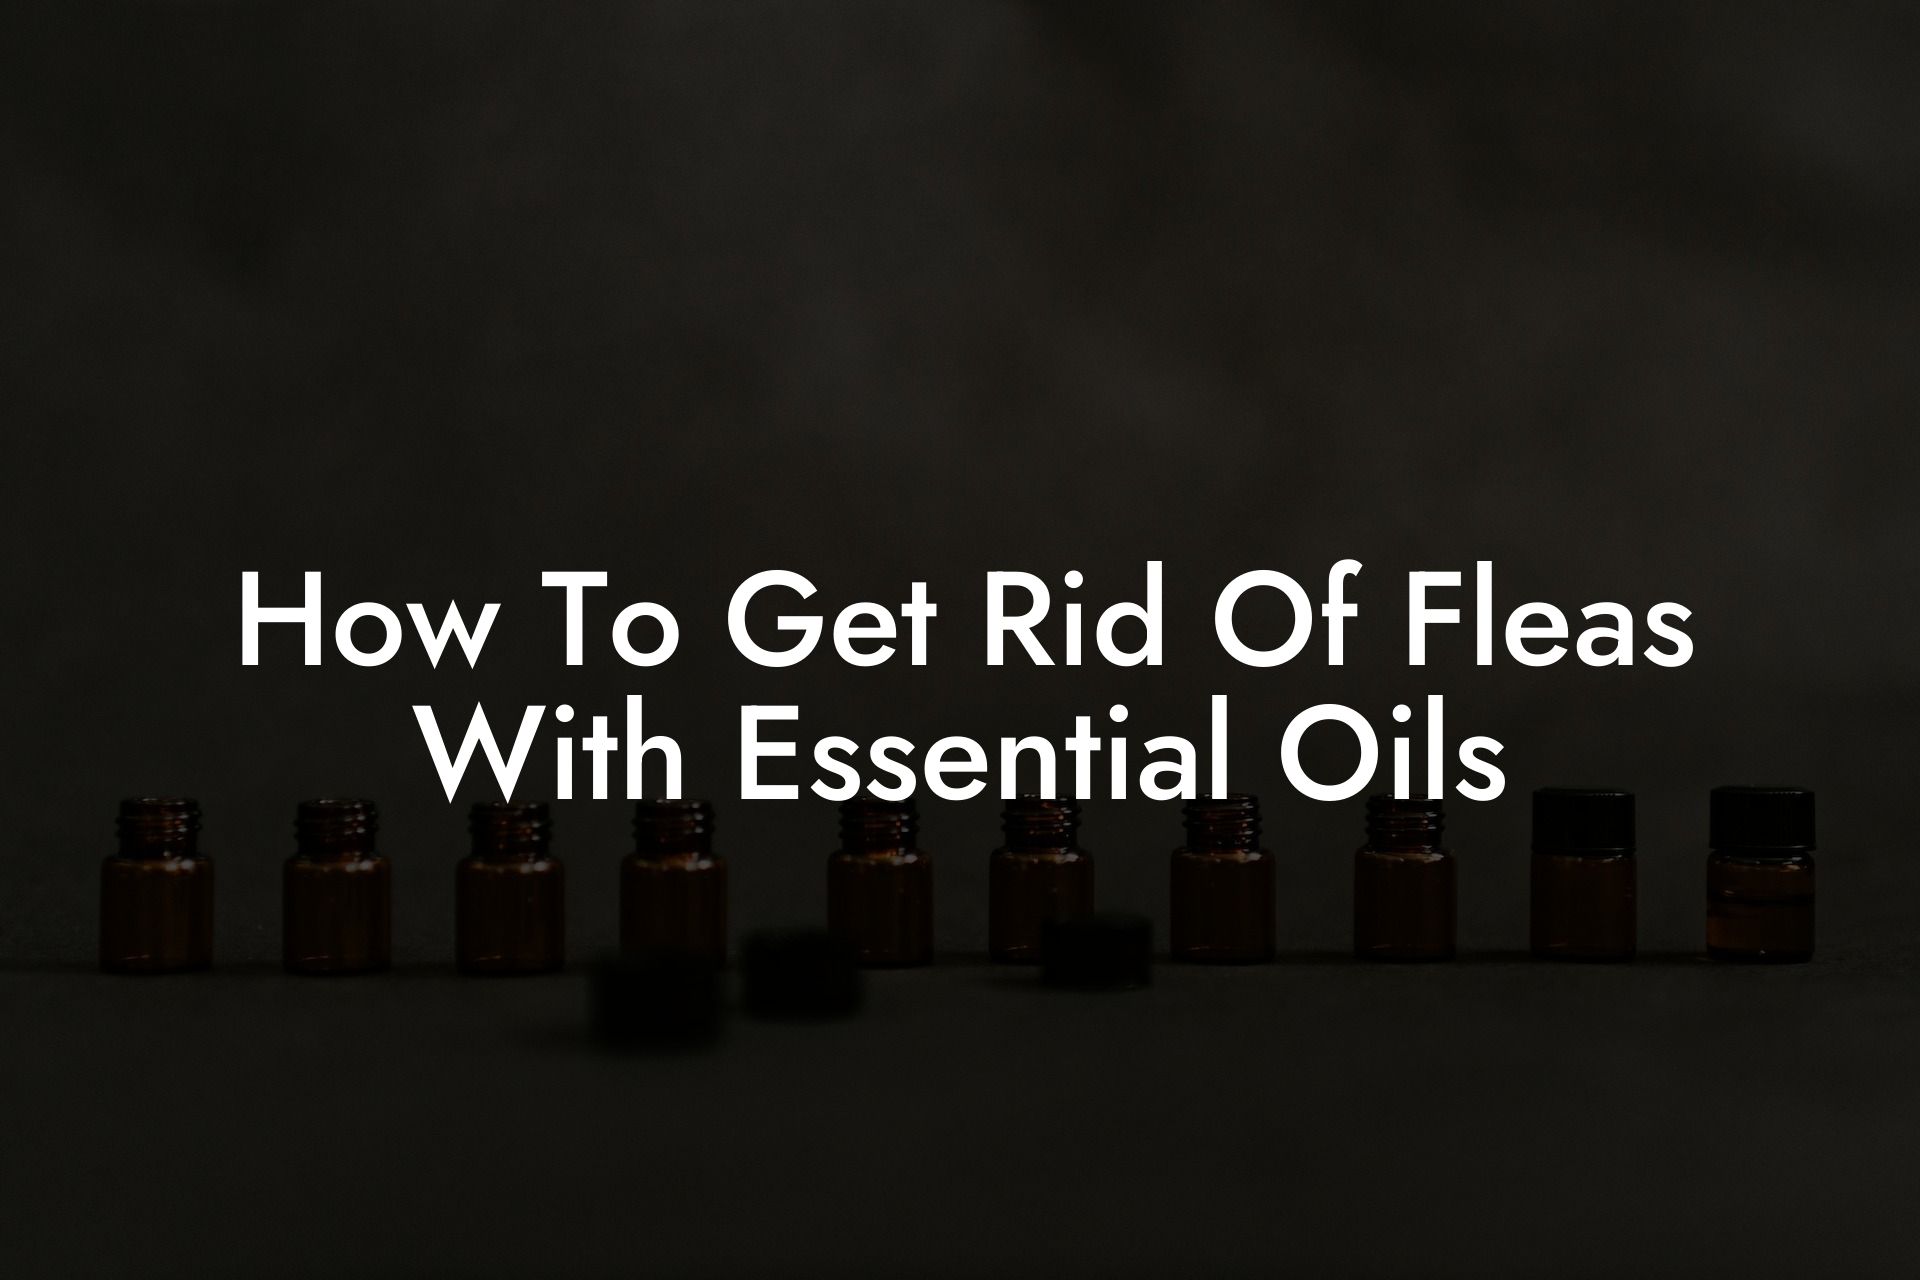 How To Get Rid Of Fleas With Essential Oils